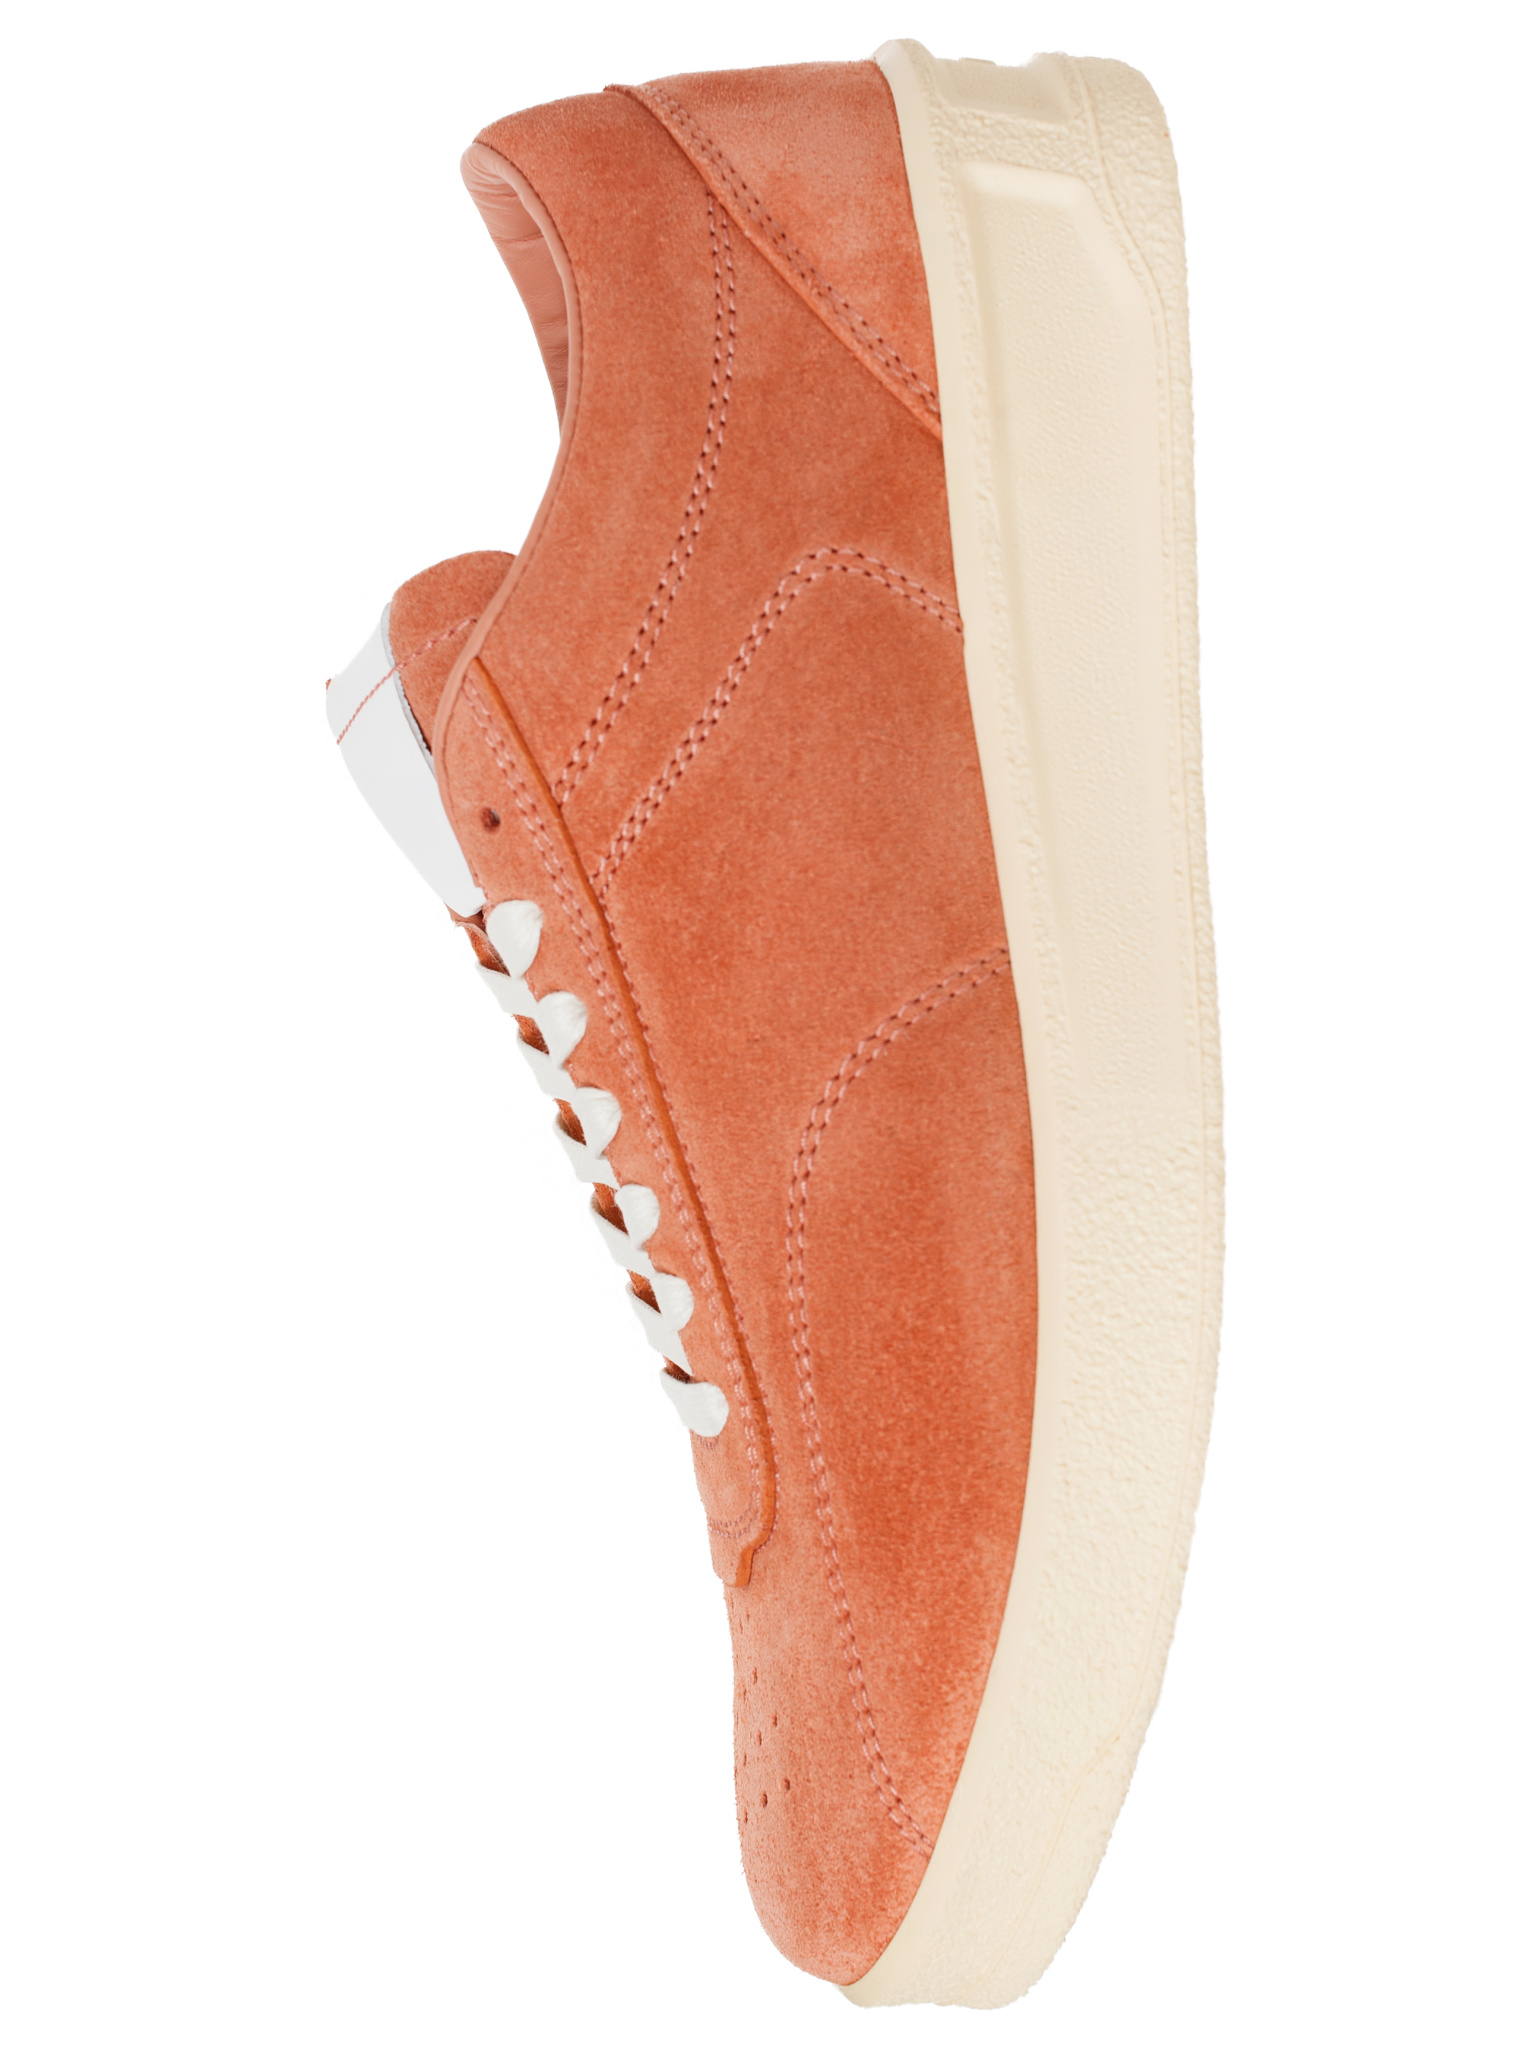 Jil Sander Leather sneakers with logo